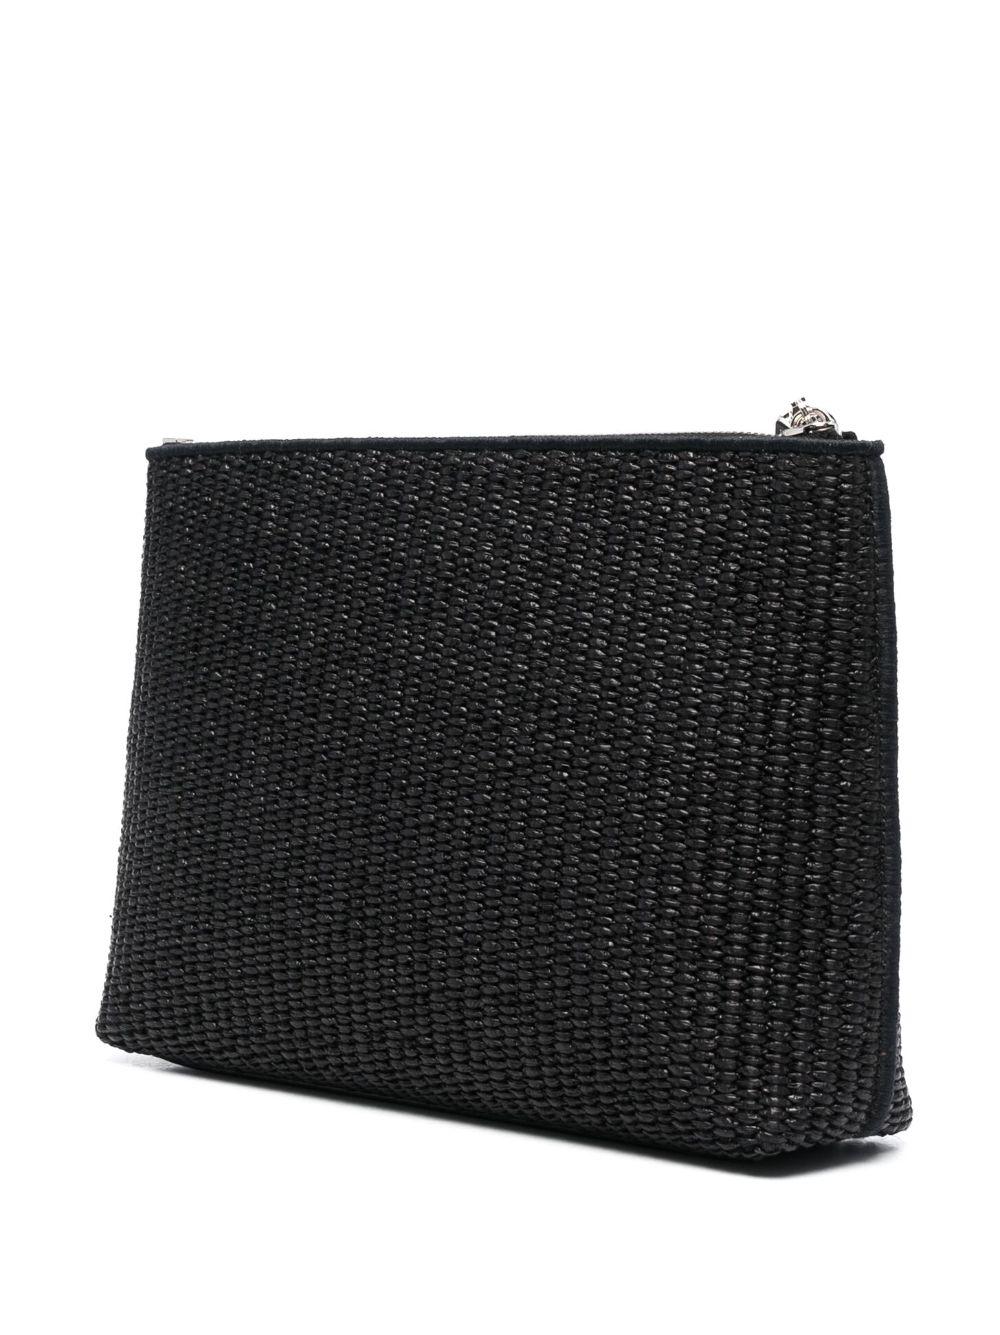 Givenchy Cotton Blend Pouch in Black | Lyst